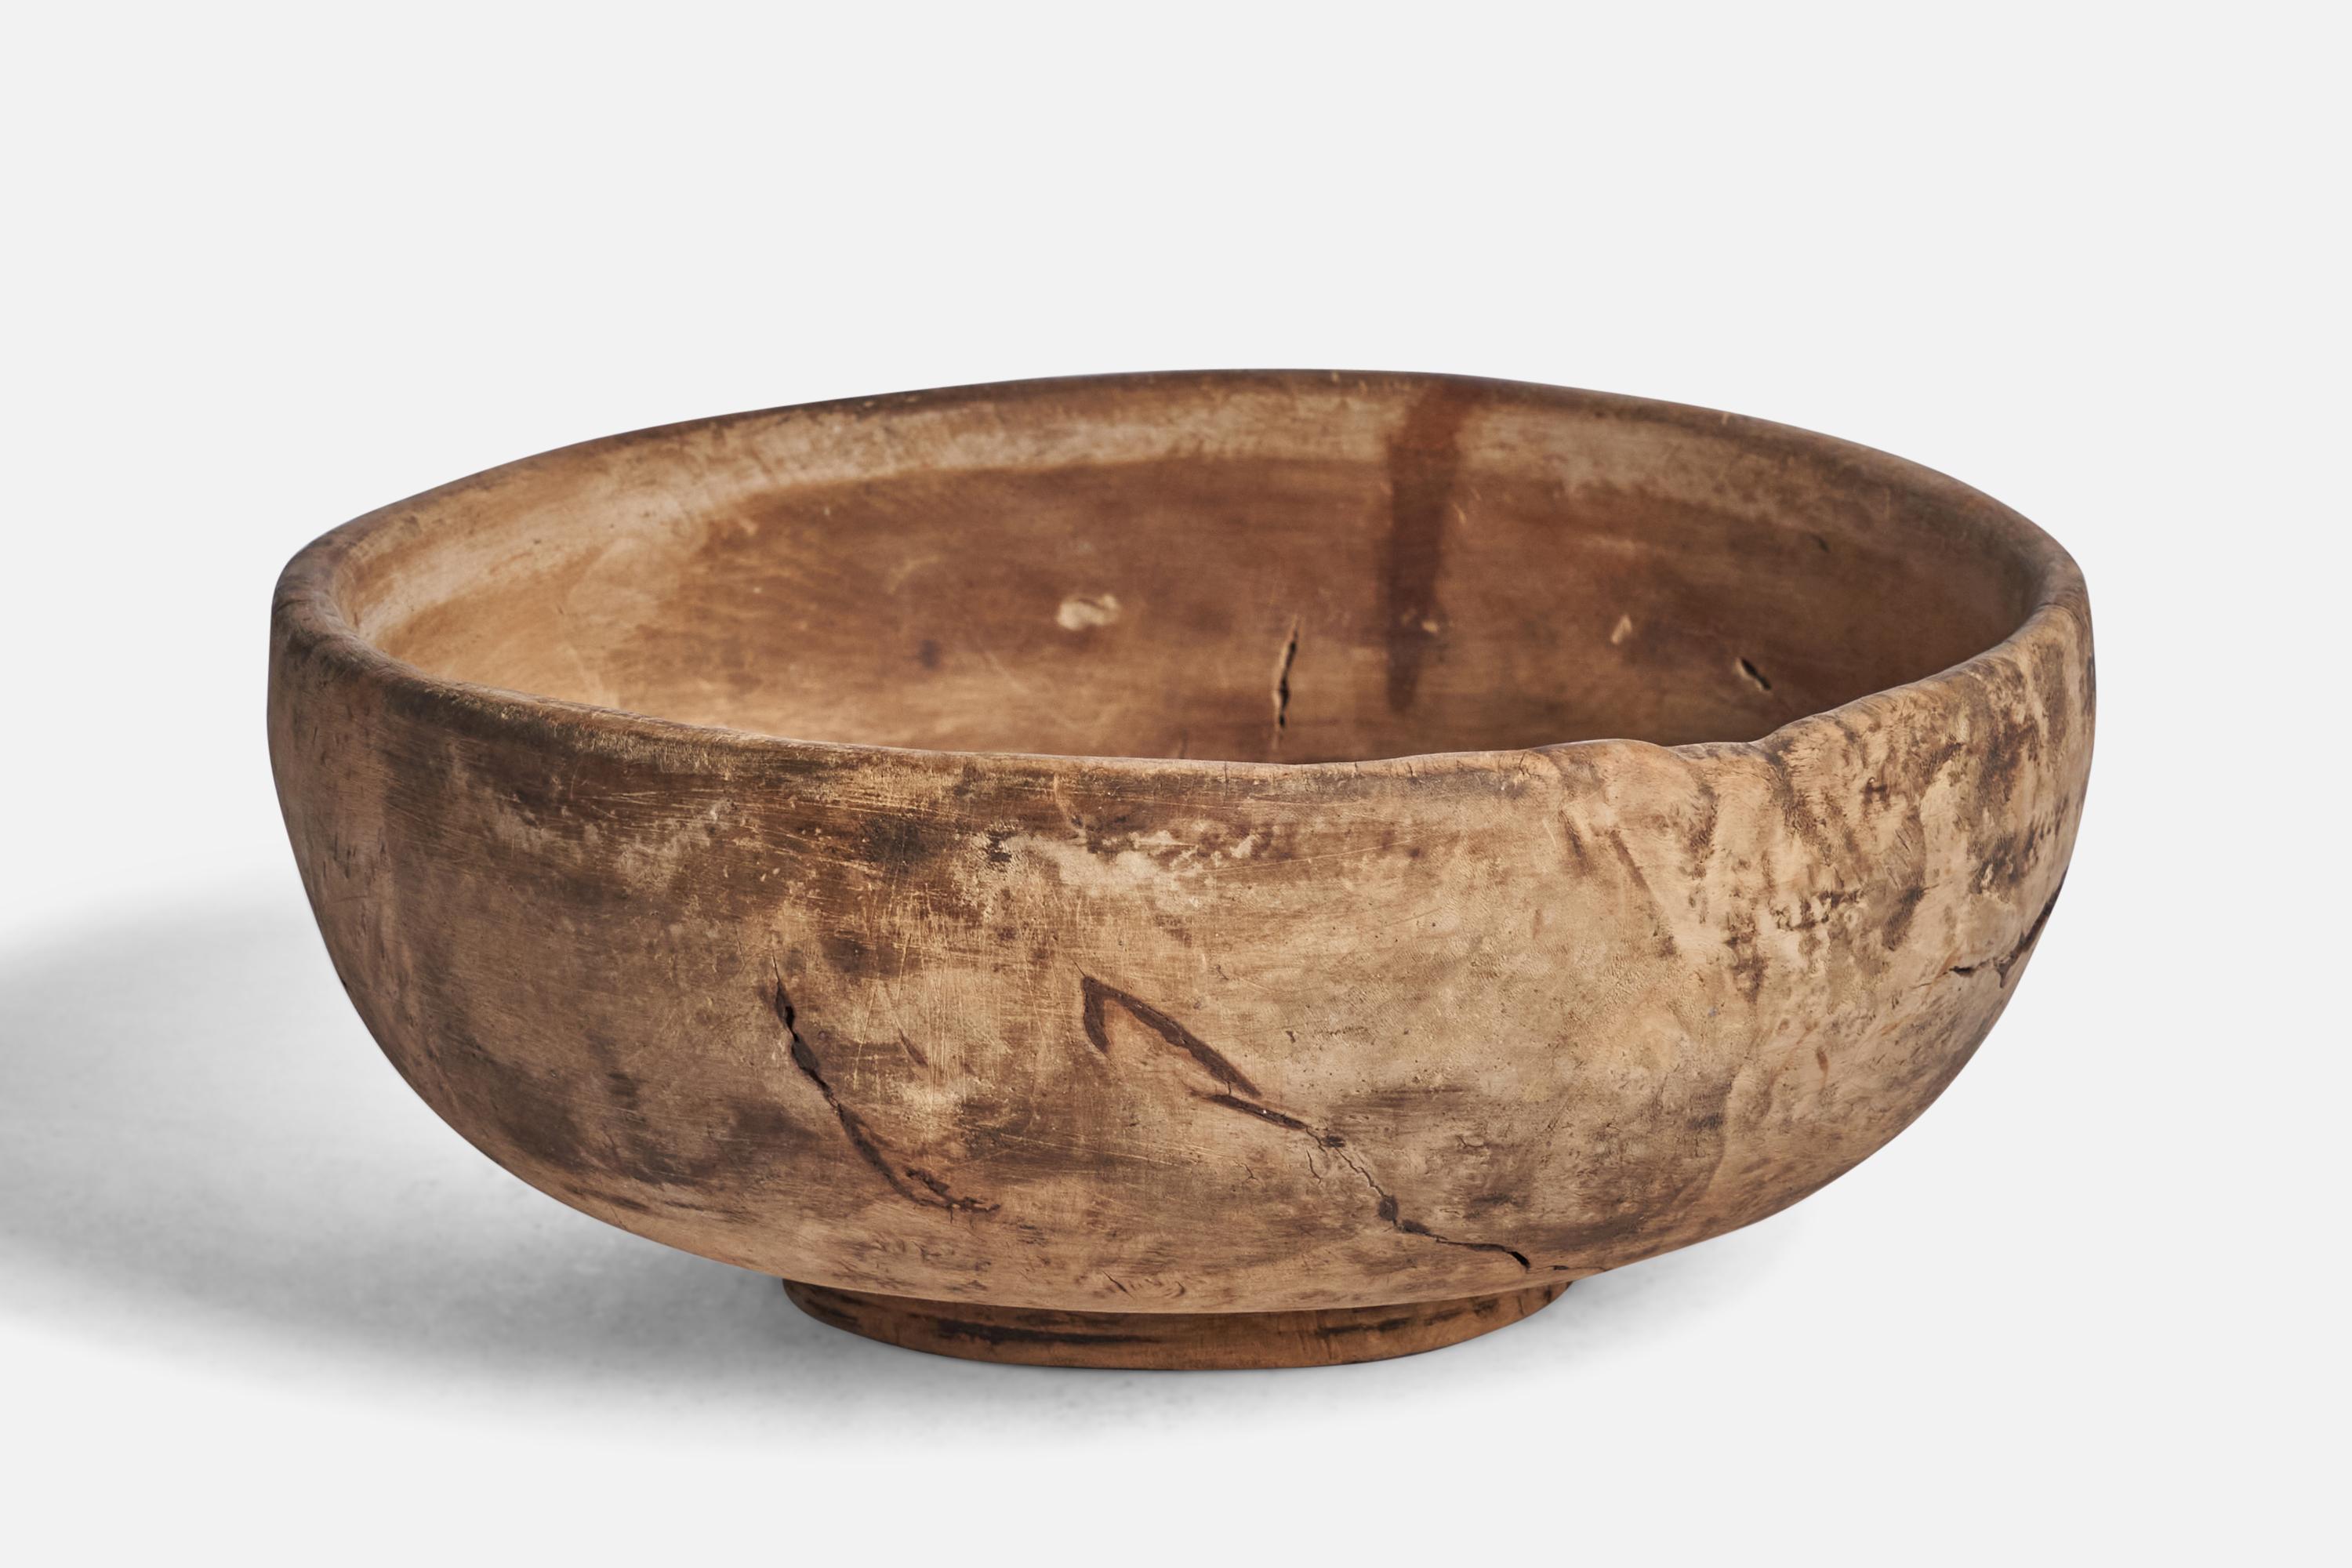 A wooden bowl produced in Sweden, 19th Century.